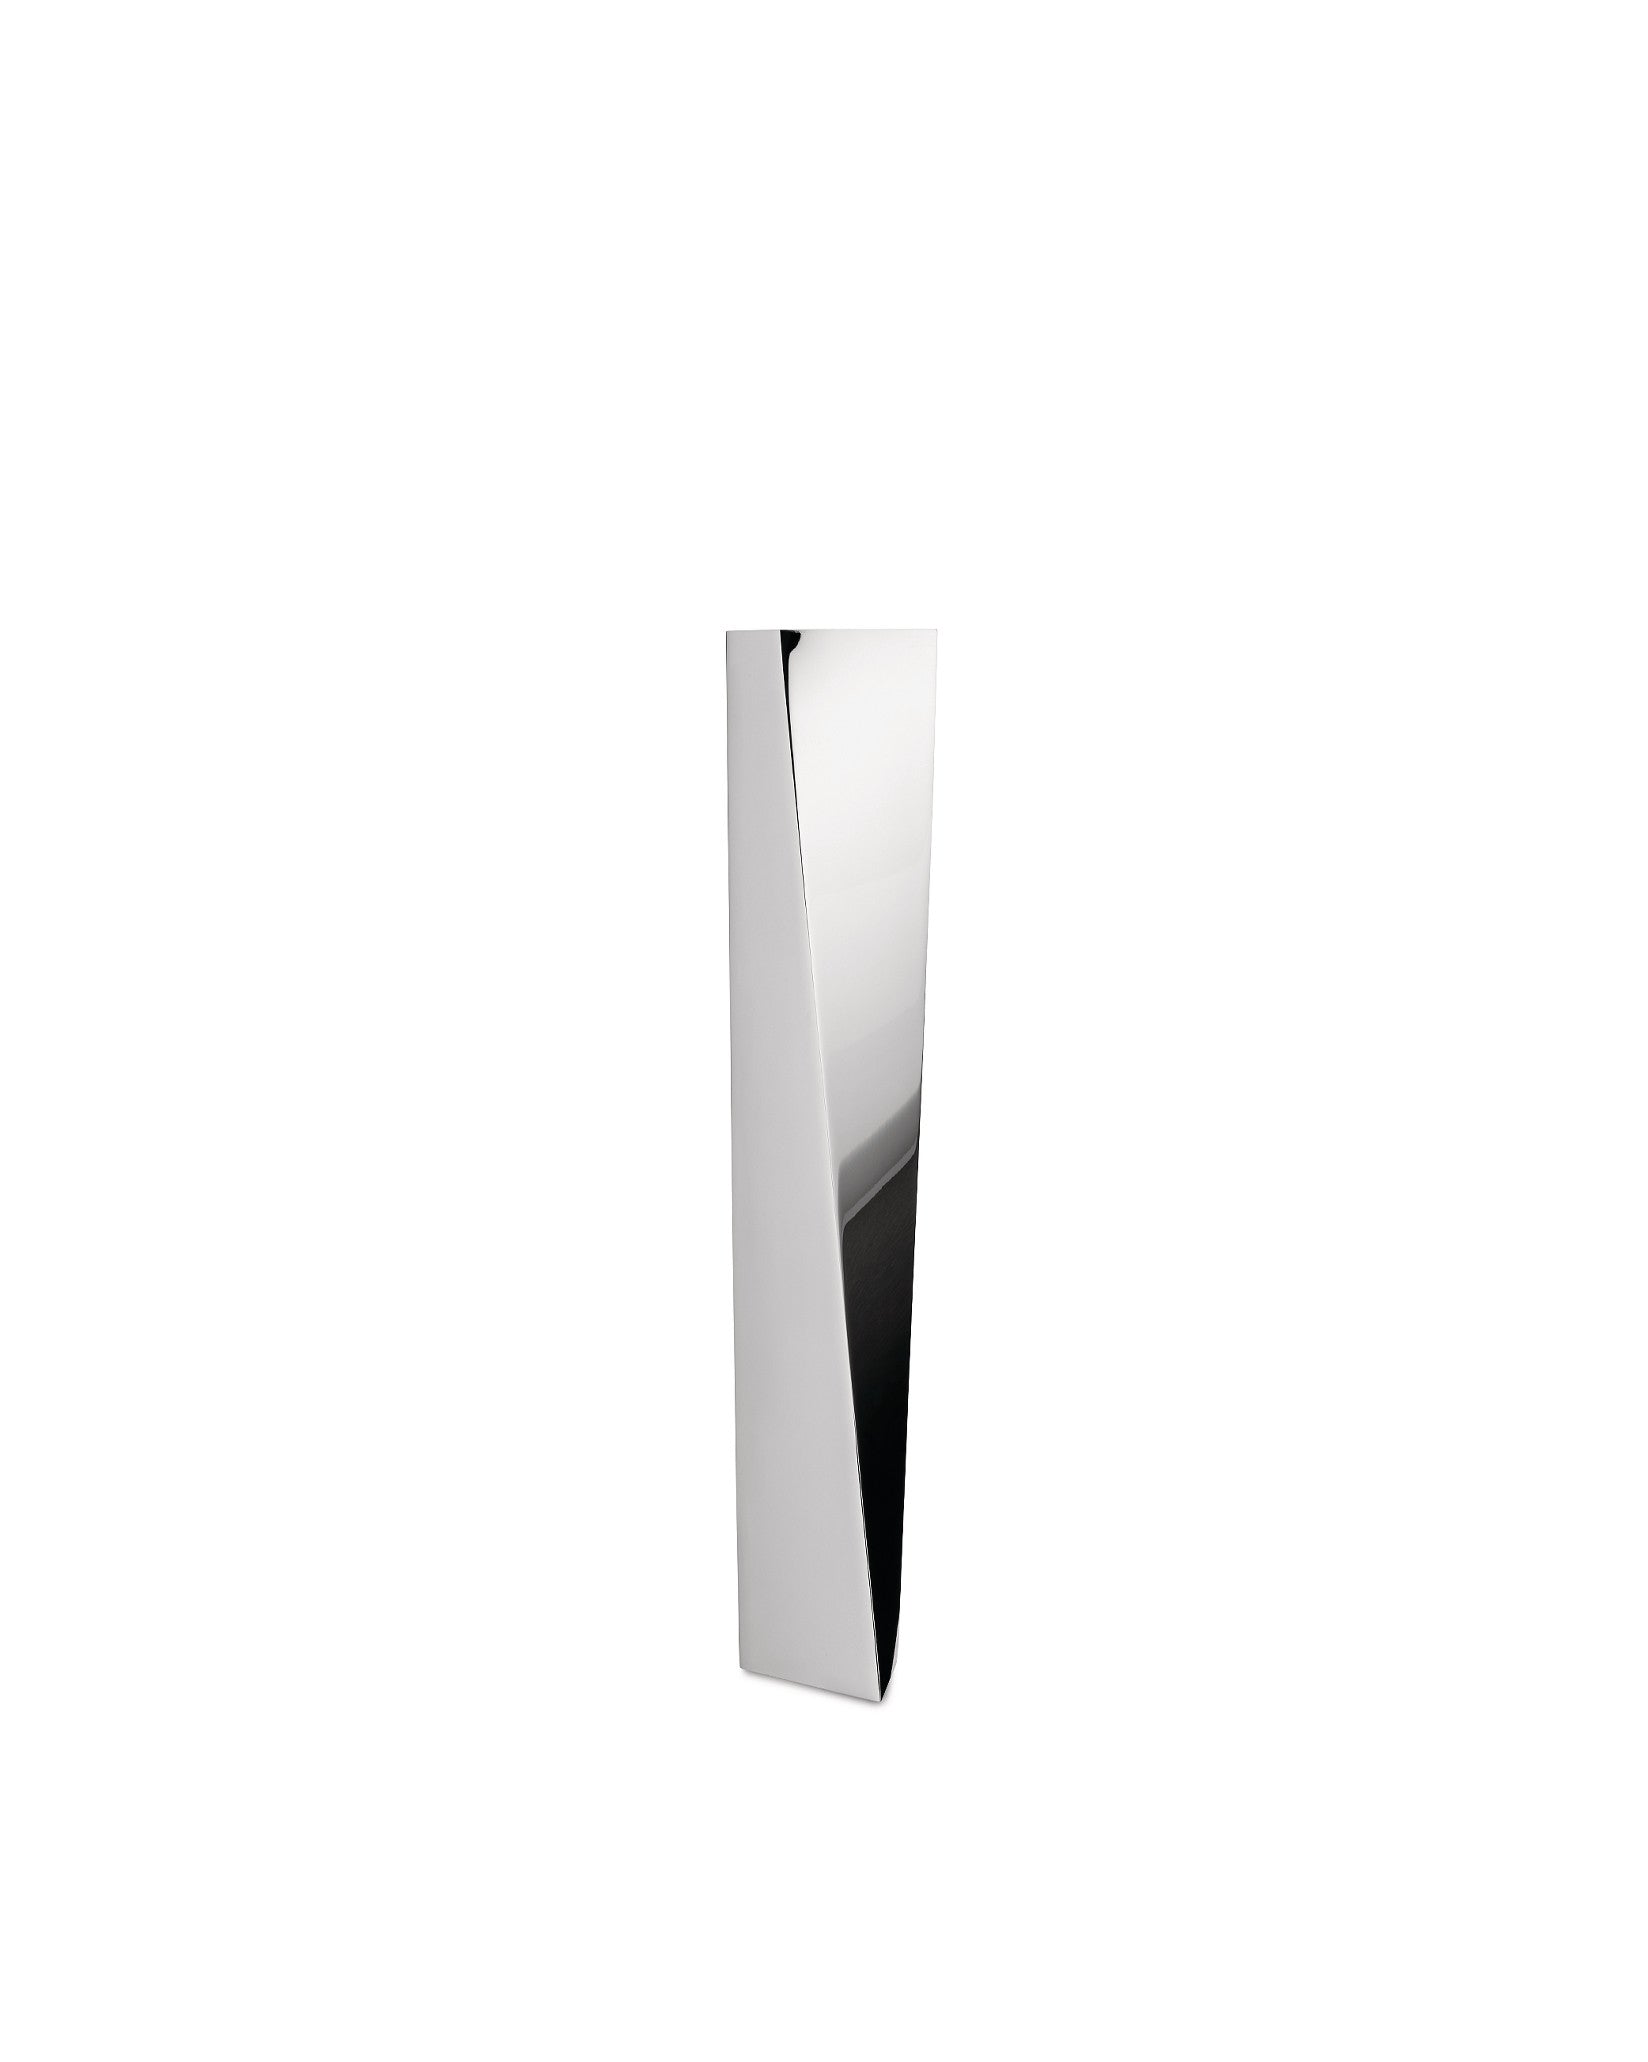 Alessi - The seal etagere, ø 29 x h 23 cm, stainless steel